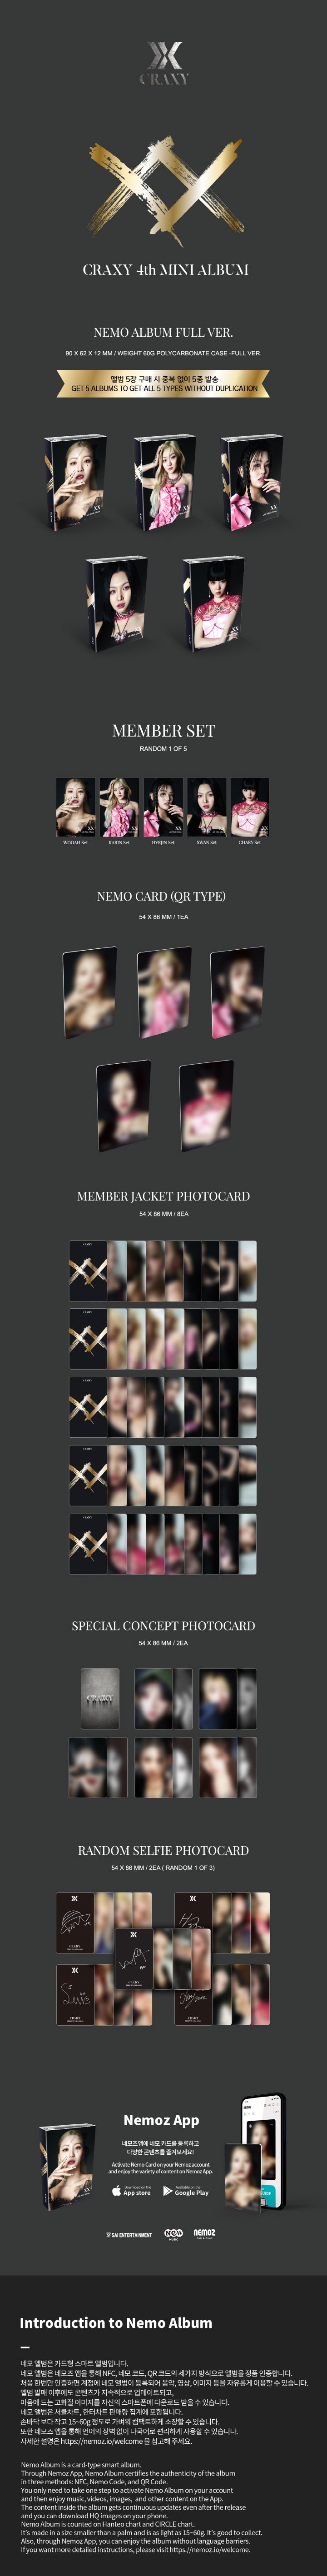 1 Nemo QR Card
8 Member Jacket Photo Cards
2 Special Concept Photo Cards
1 Selfie Photo Card (random out of 3 types)